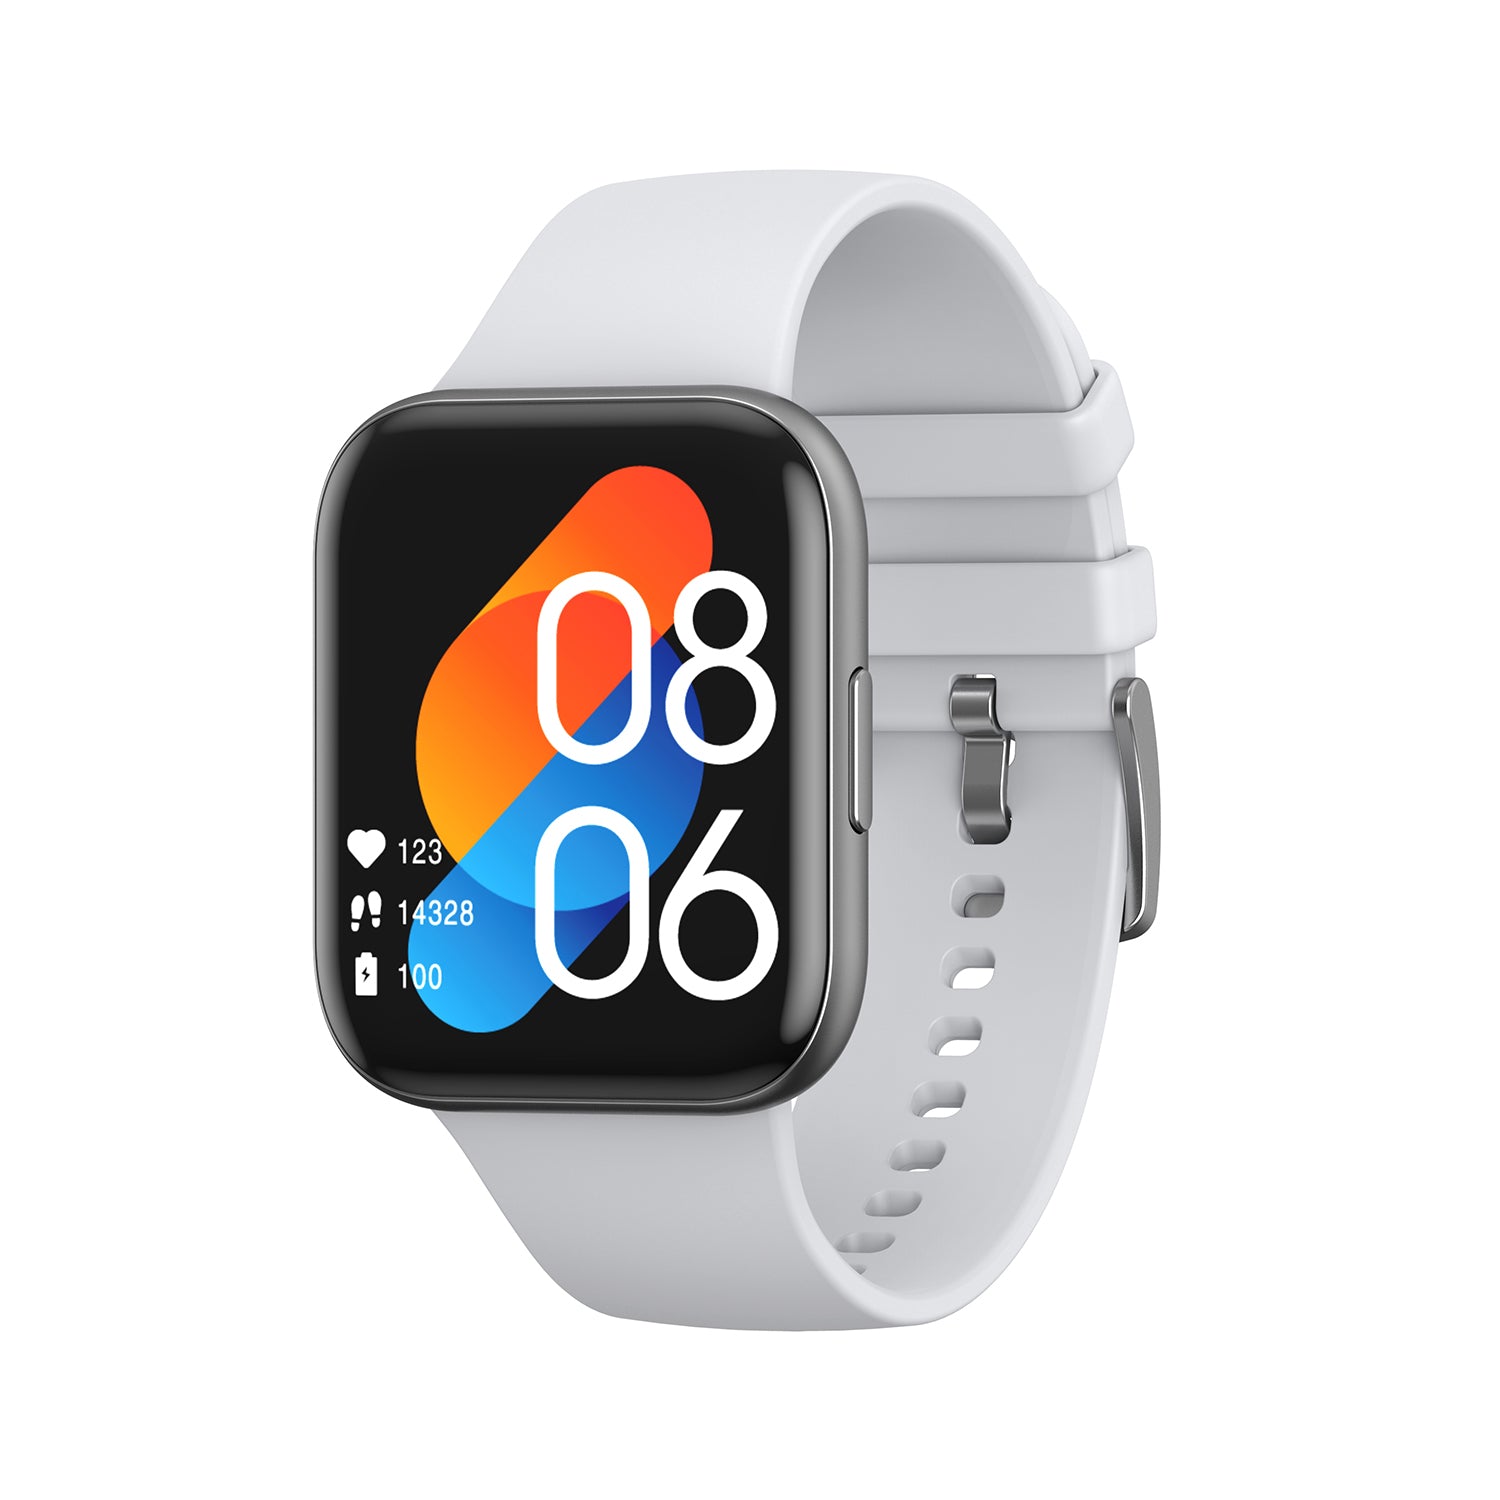 HAVIT M9021 Full Touch Screen Smart Watch with 12 Sports Modes, IP68 W